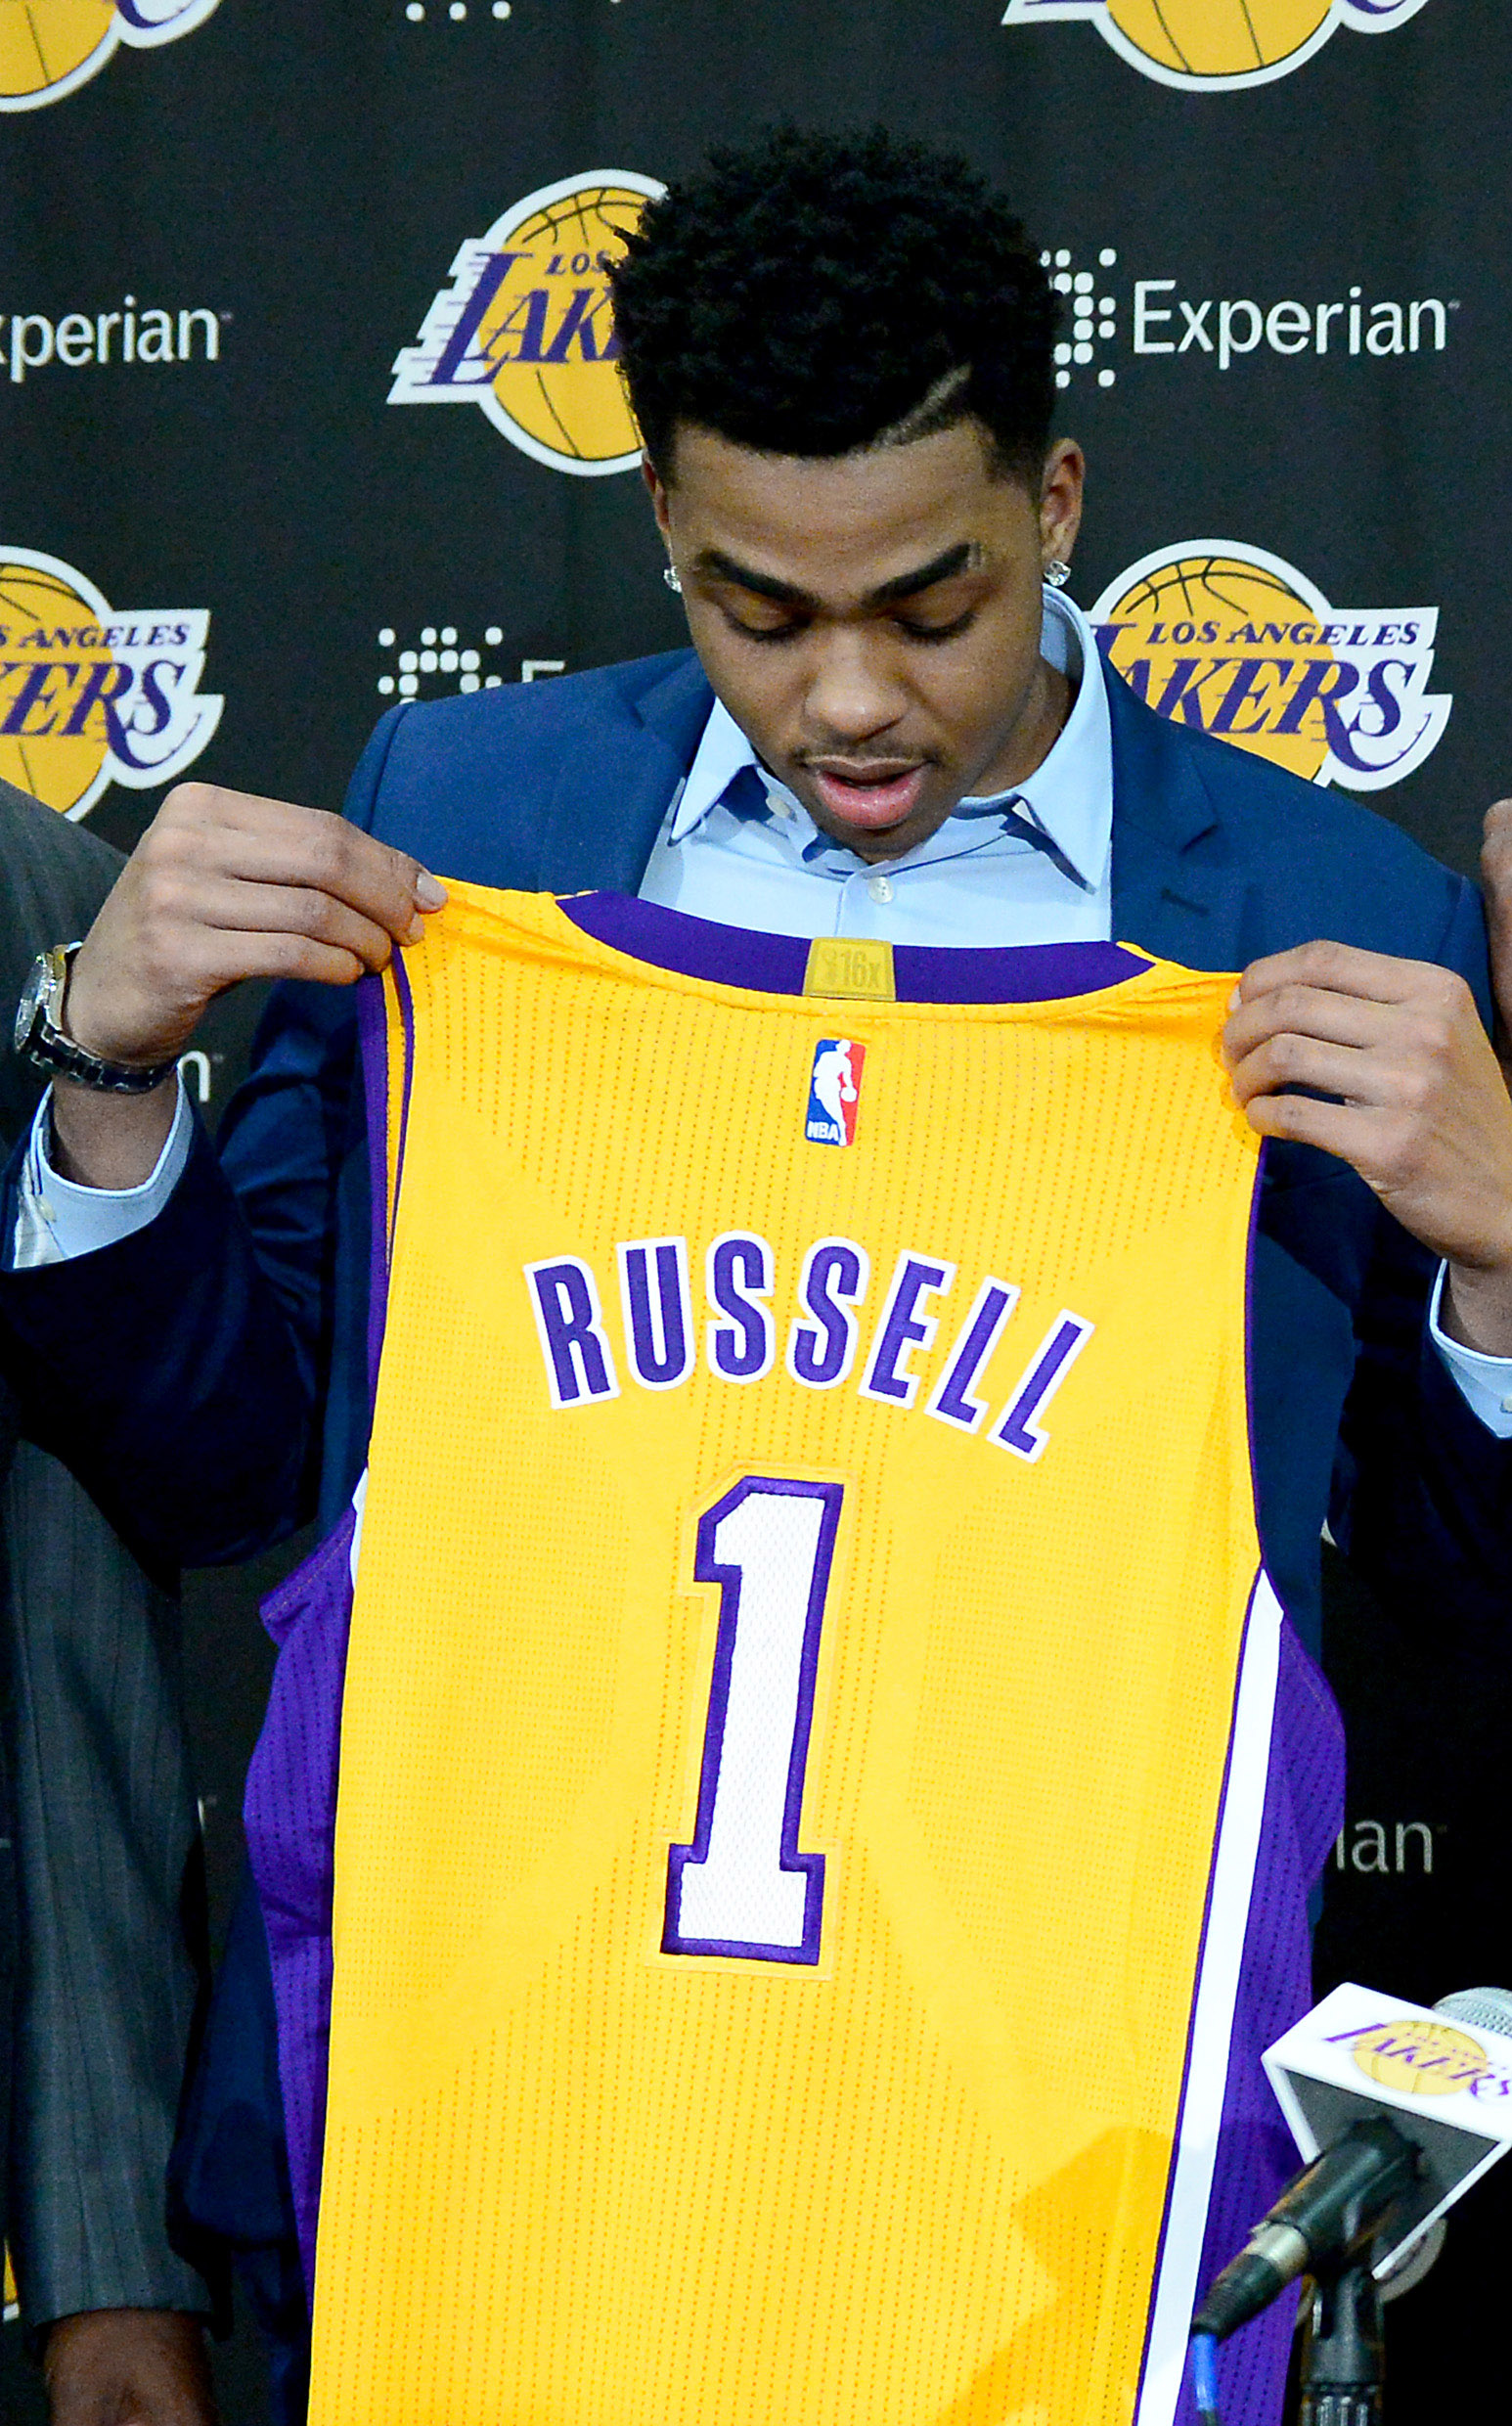 russell lakers jersey